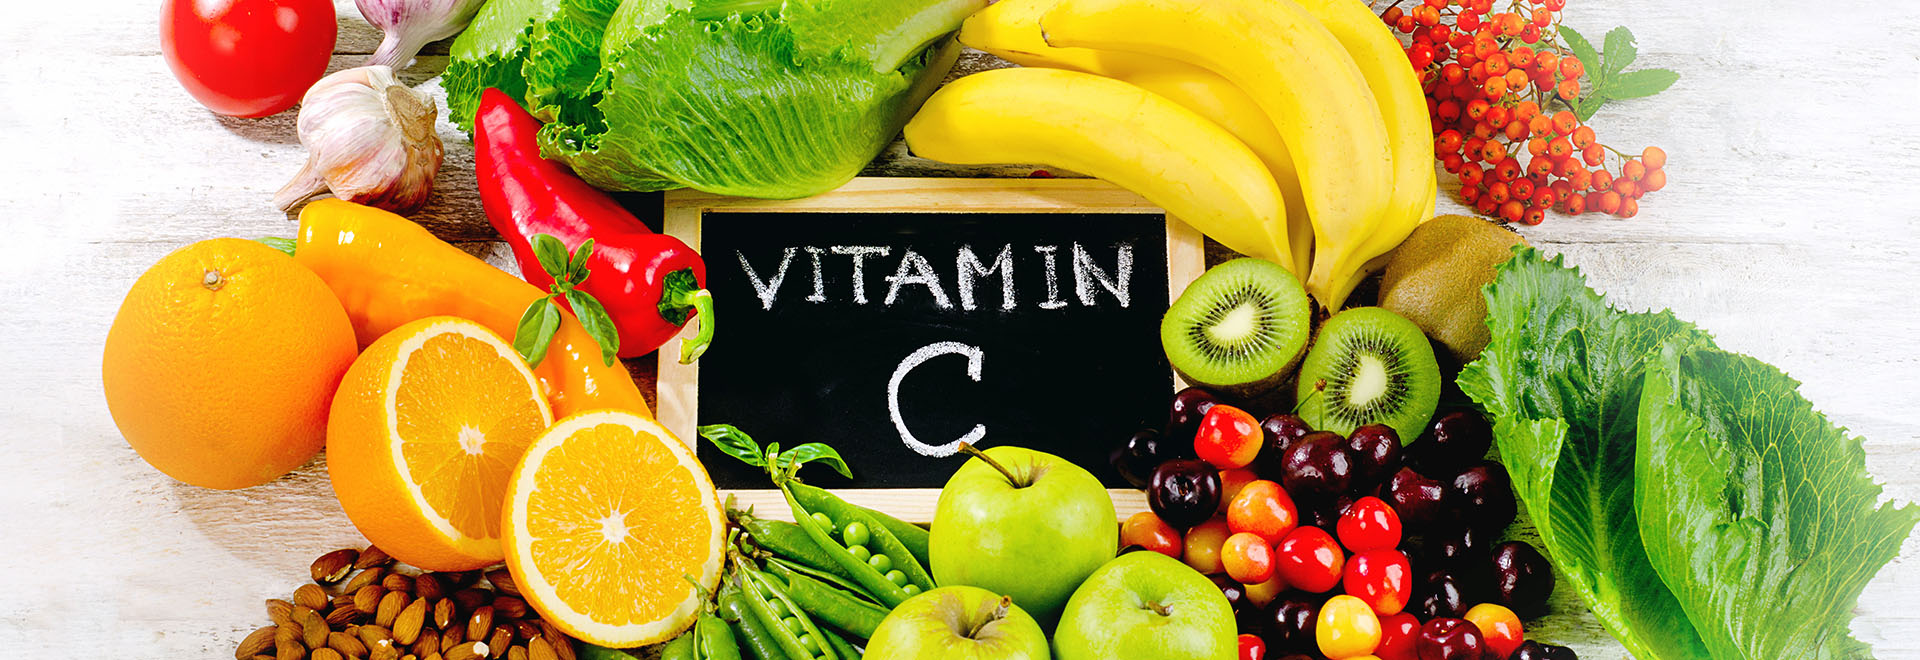 vitamin-c-daily-consumption-diet-tips-and-fruits-vitamin-c-content